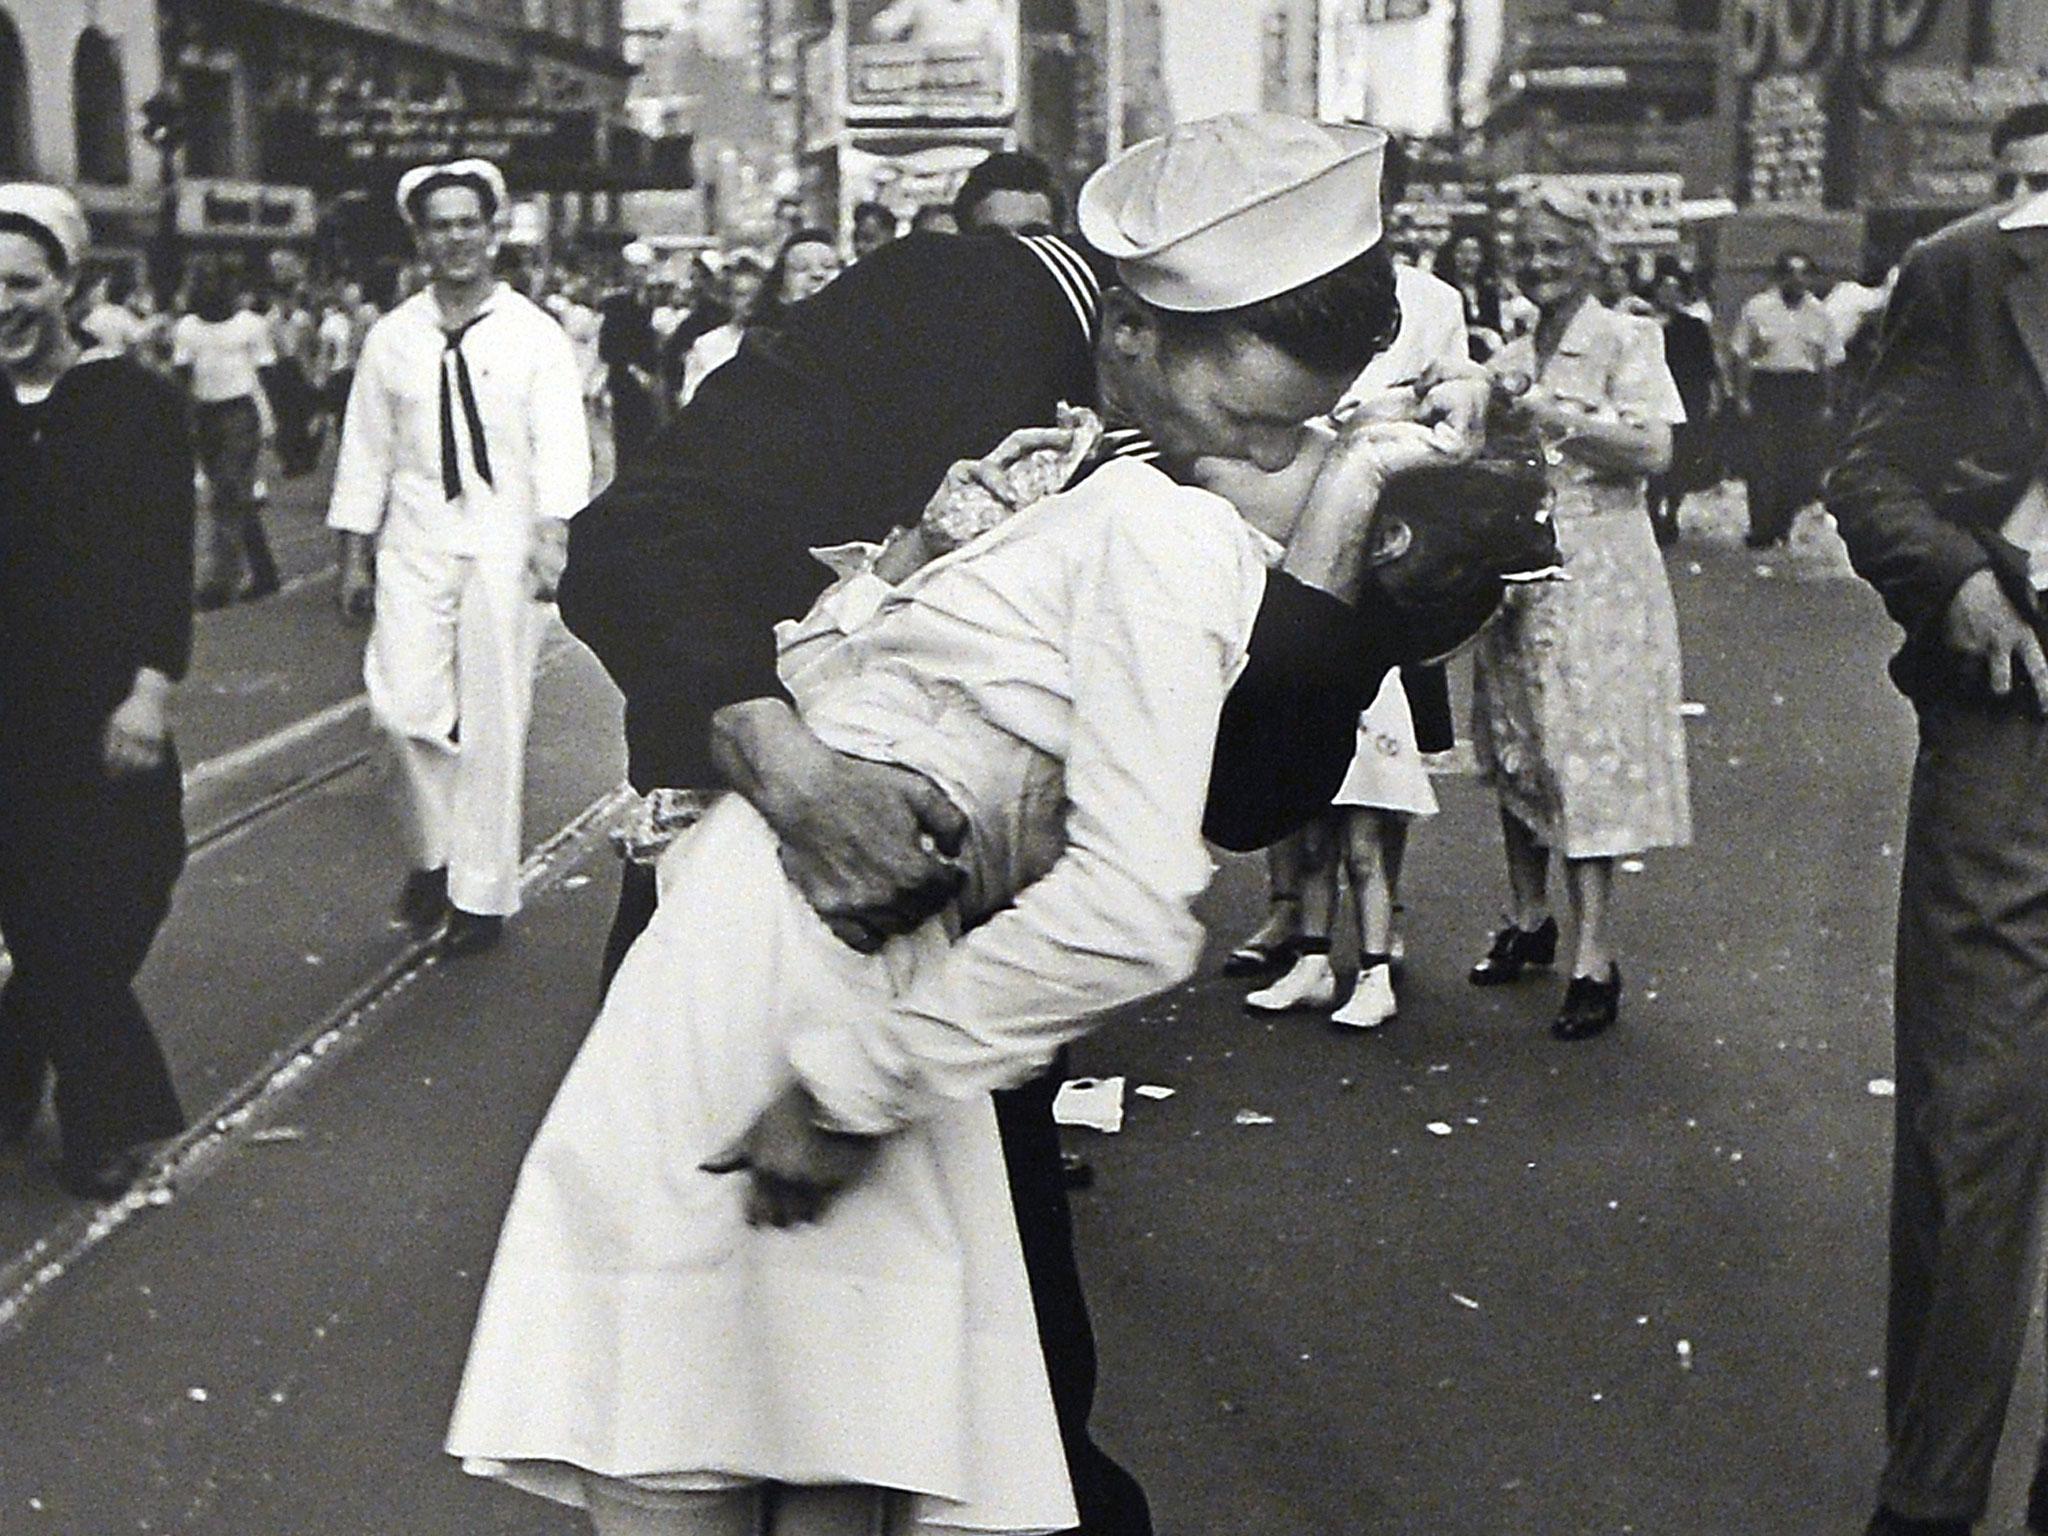 A snapshot of 'VJ Day a Times Square, New York, NY, 1945' by Alfred Eisenstaedt during the 'Life. The great photographers' exhibition at the auditorium on April 30, 2013 in Rome.